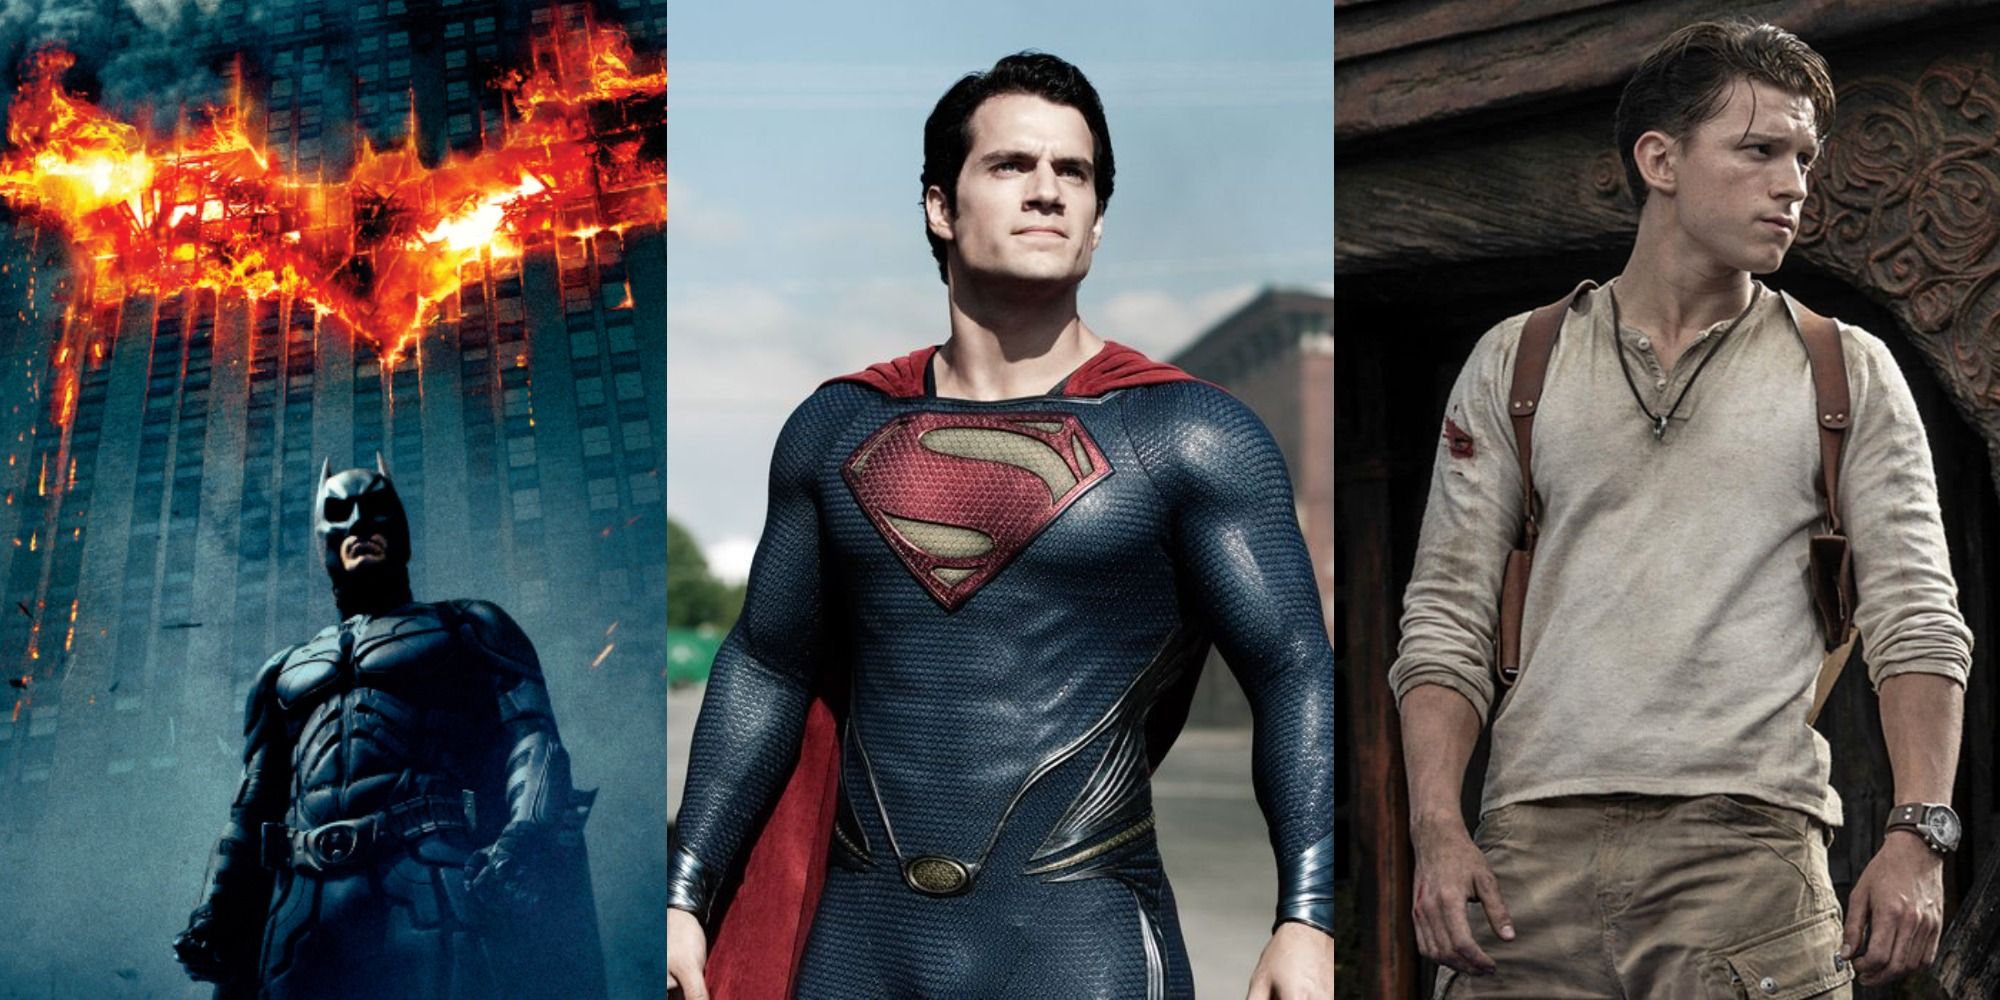 combined images of The Dark Knight, Henry Cavill in Man of Steel, Tom Holland in Uncharted